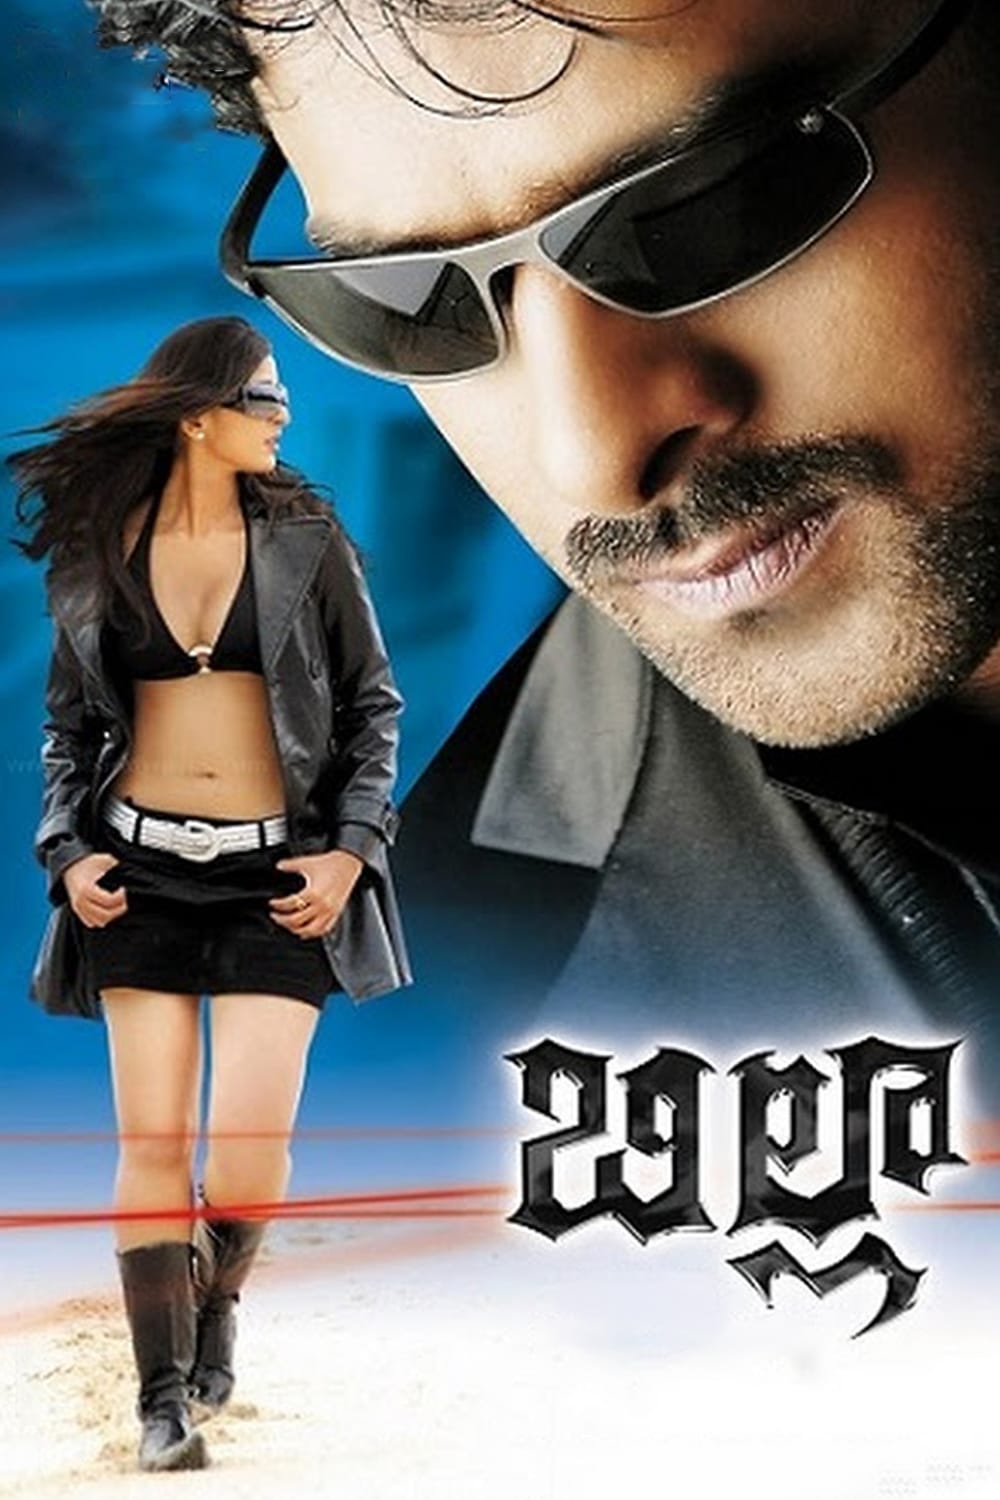 Poster for the movie "Billa"